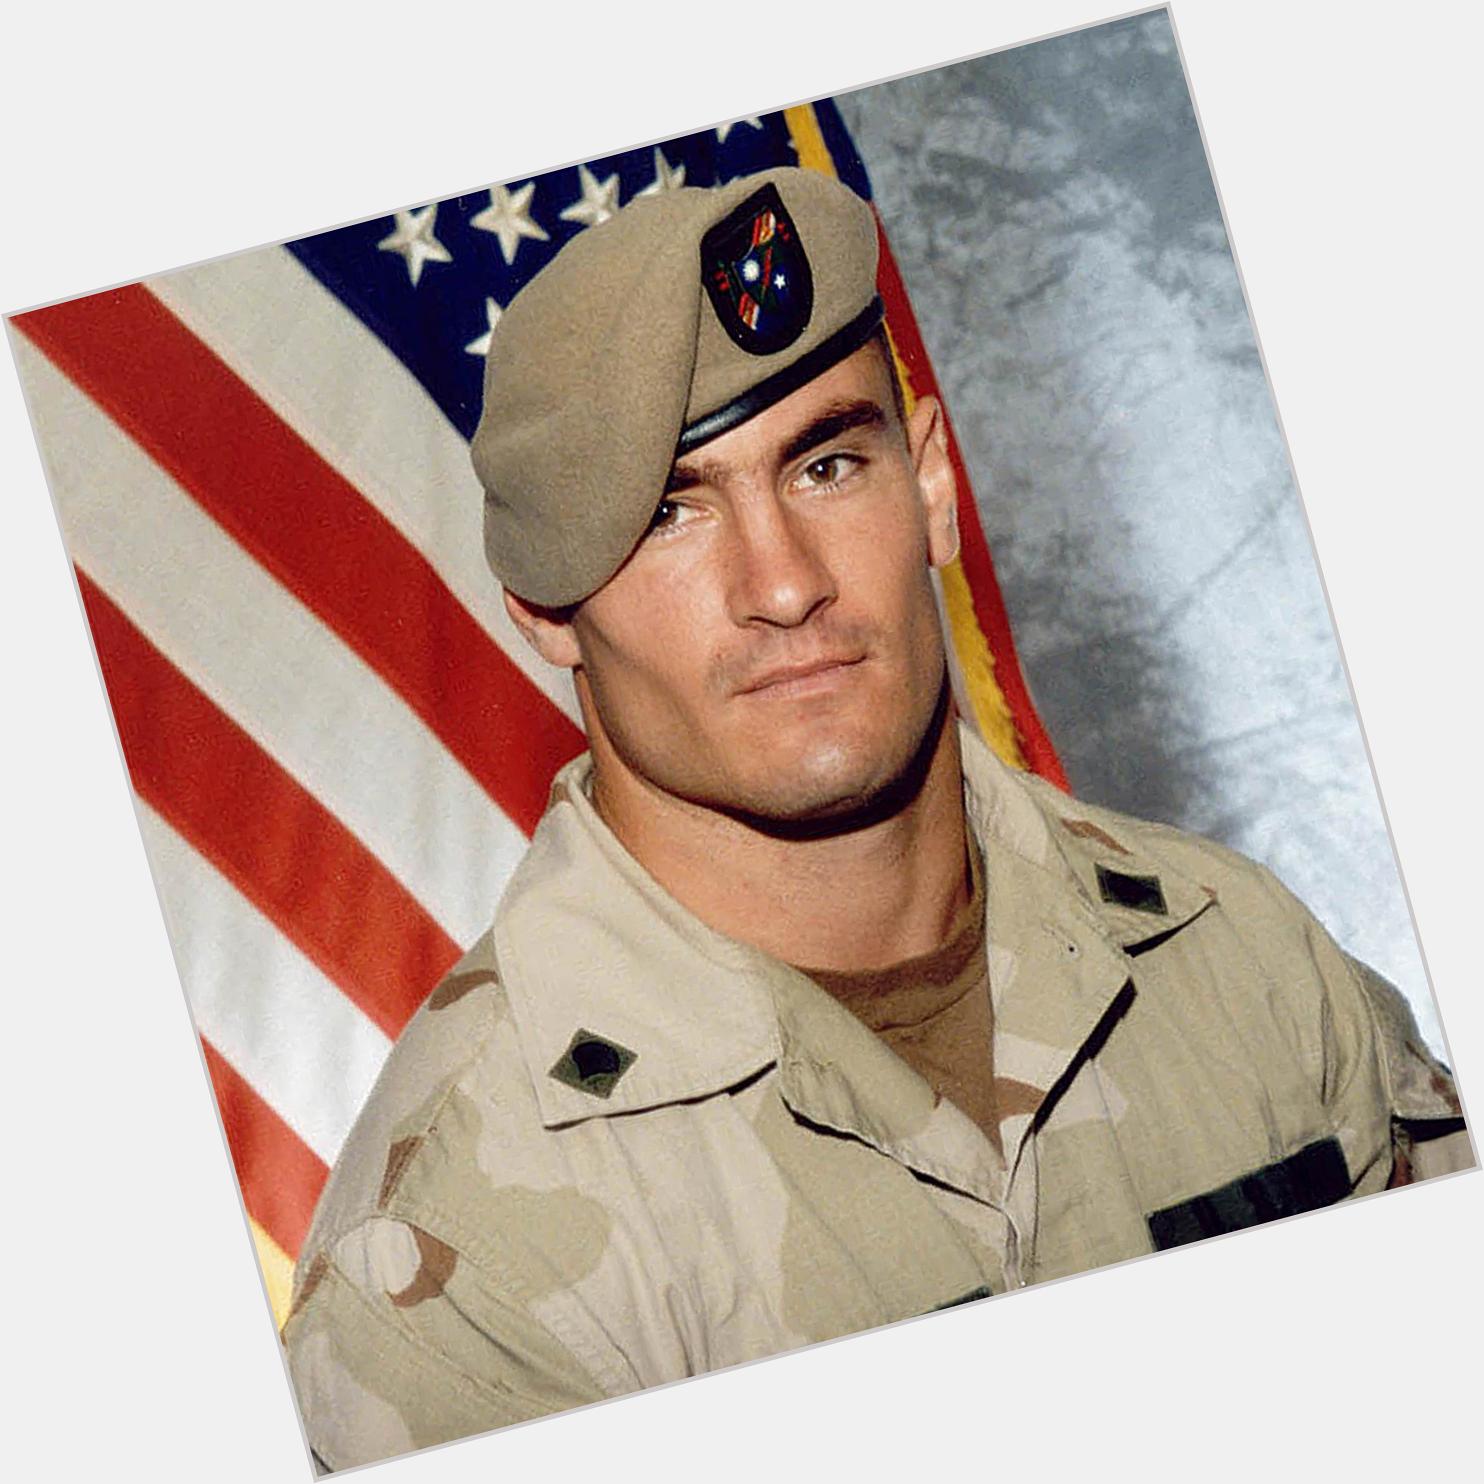   Today, Army Ranger Pat Tillman would have celebrated his 38th birthday.  Happy birthday Pat. Forever thankful